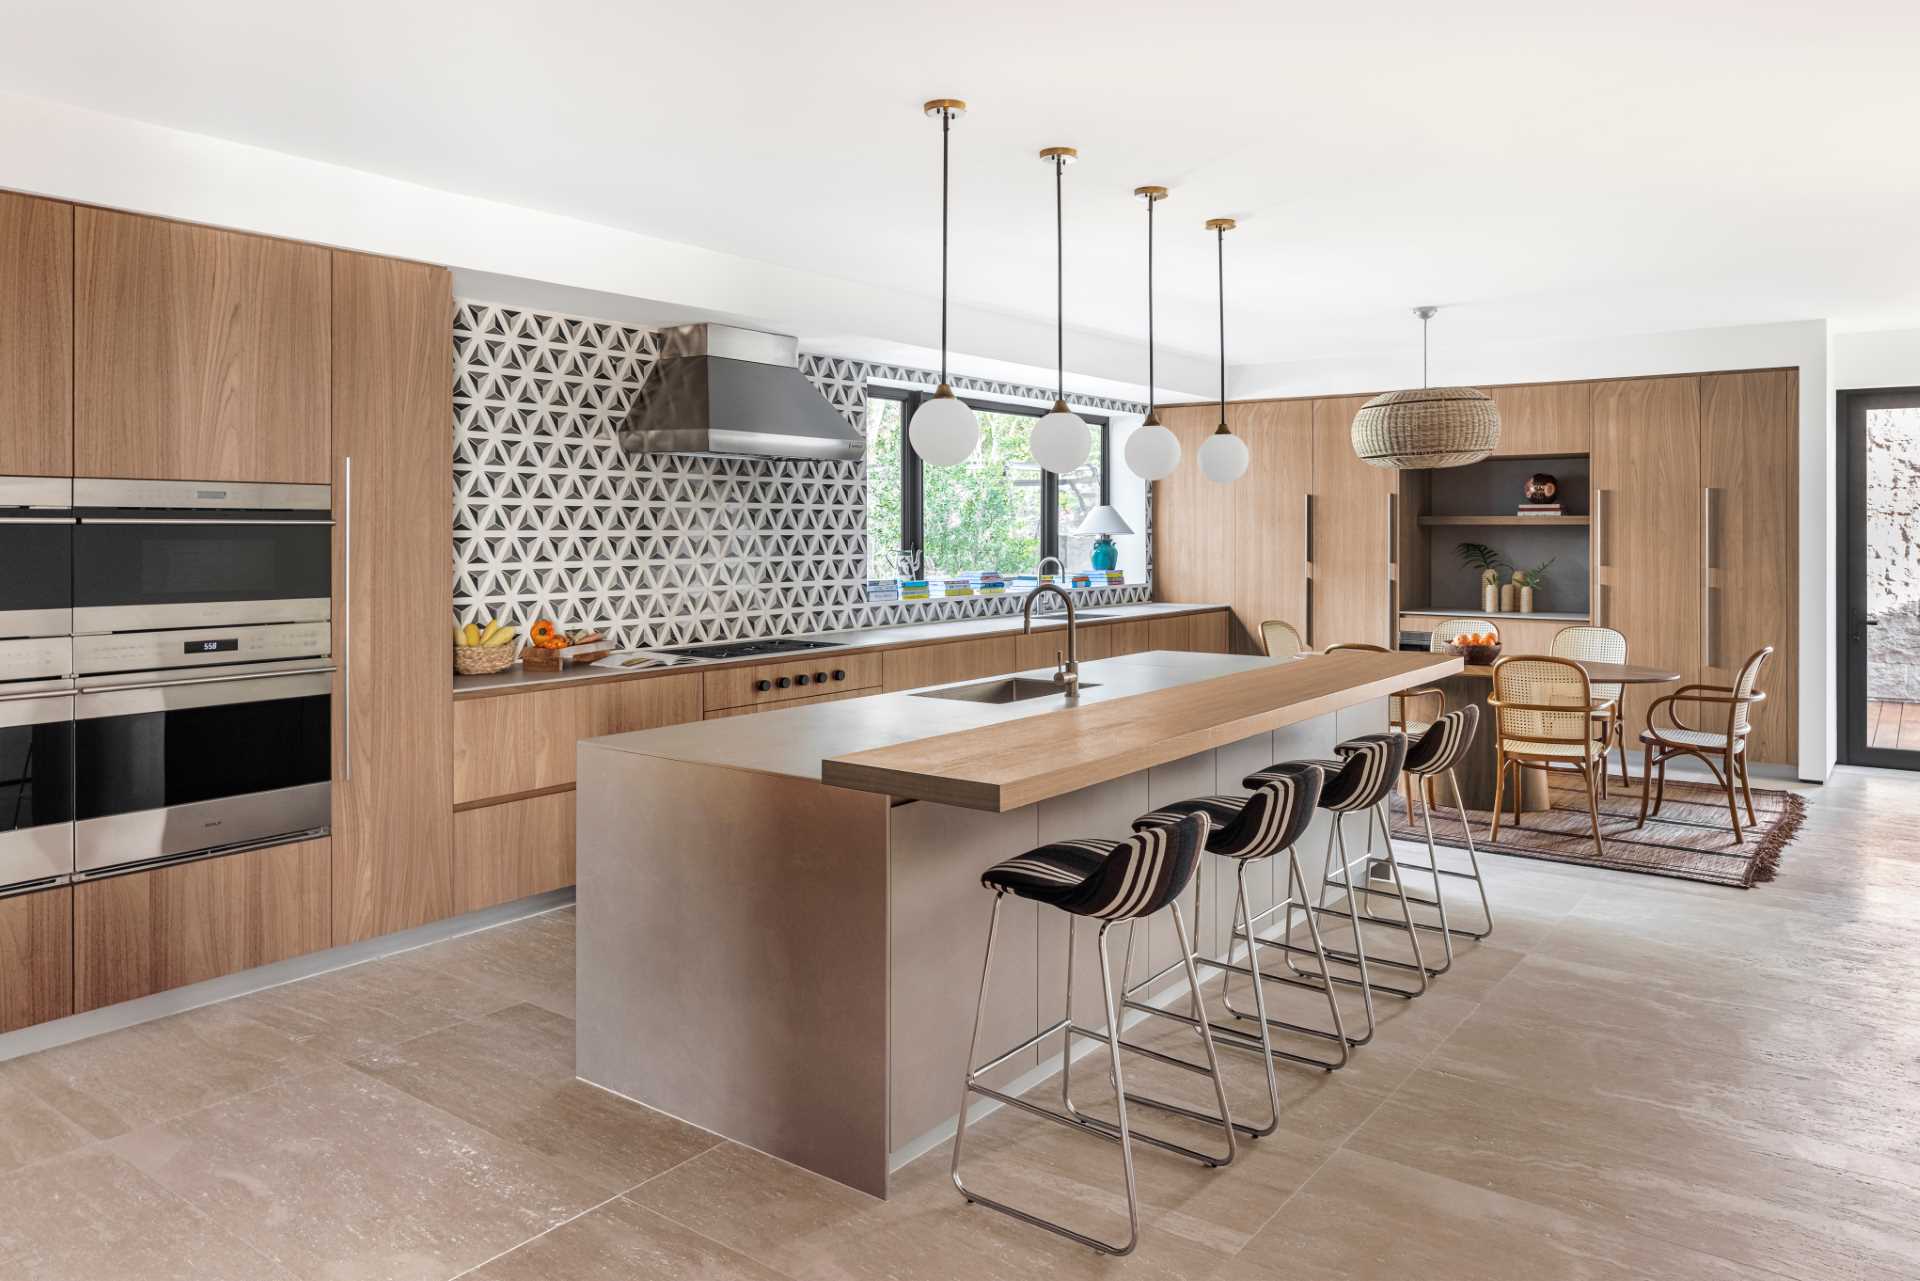 This modern kitchen, which features modern wood cabinets and a patterned backsplash, also includes a large island with counter stools. There's also a casual dining area.